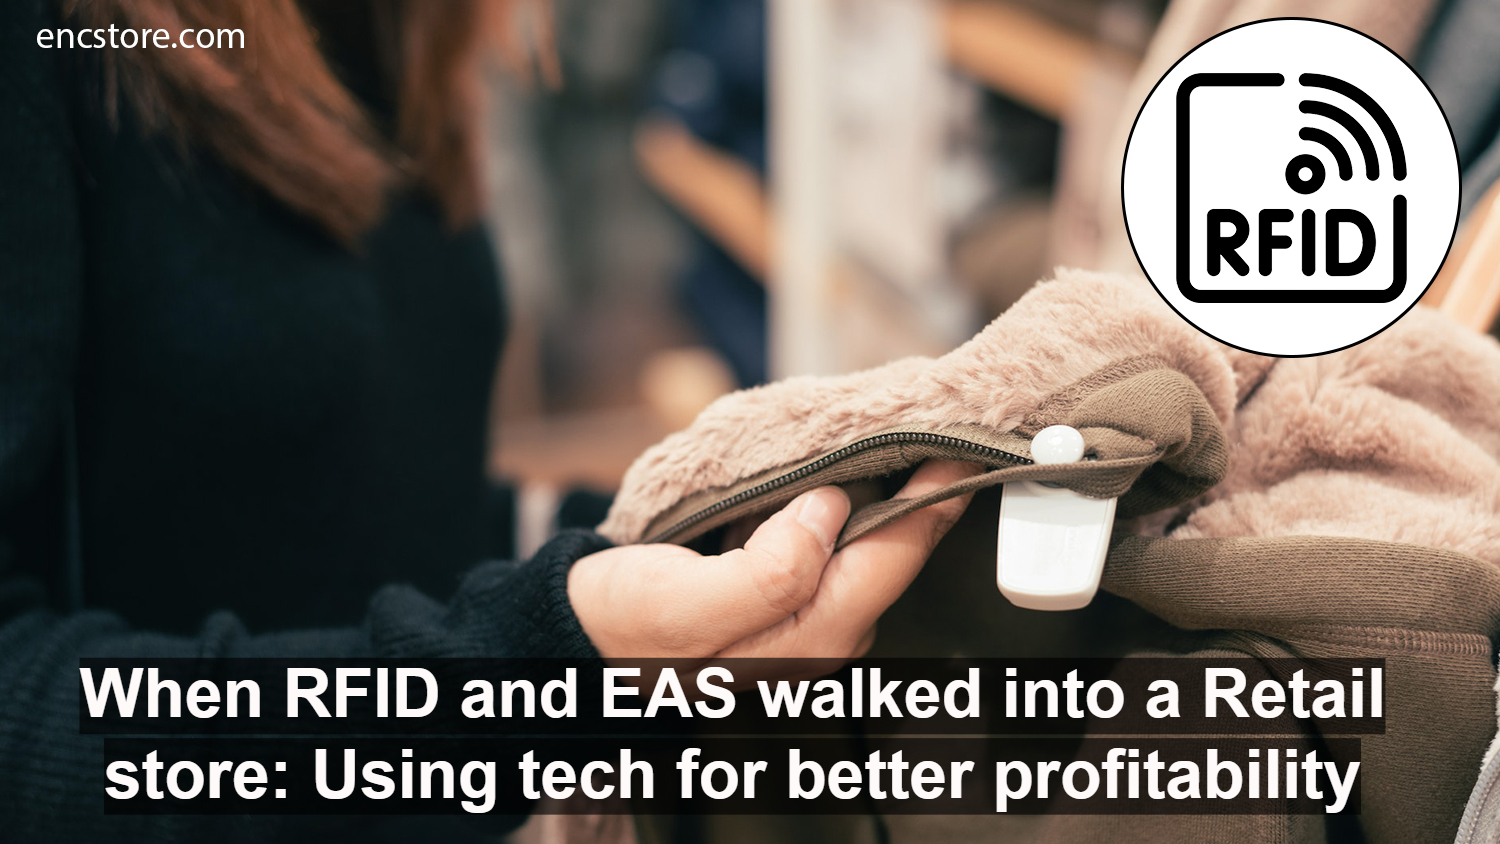 RFID and EAS for better profitability in retail